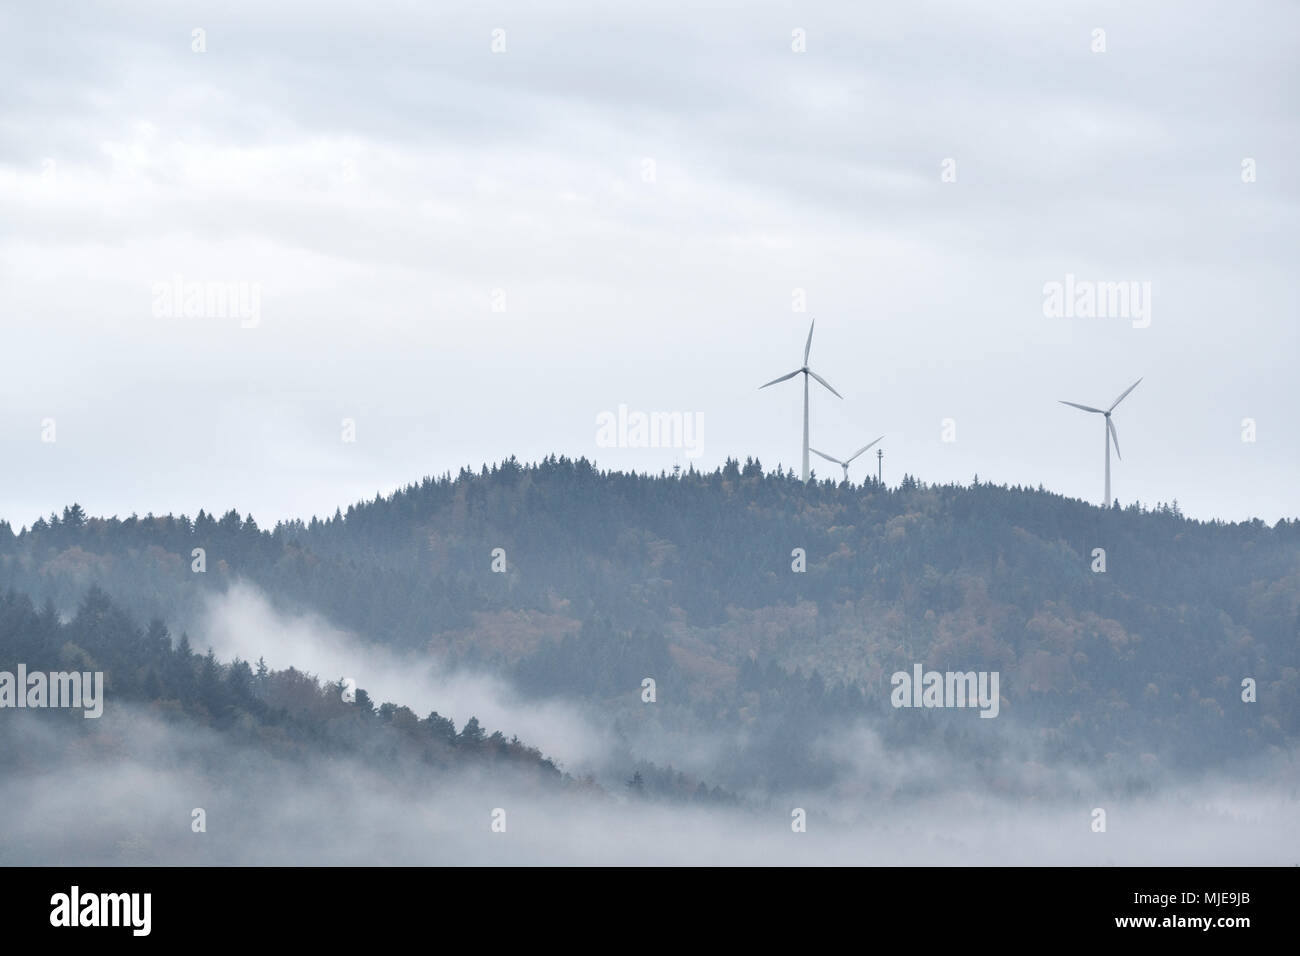 three wind turbines on a mountain in the Black Forest, forest, rain and fog Stock Photo